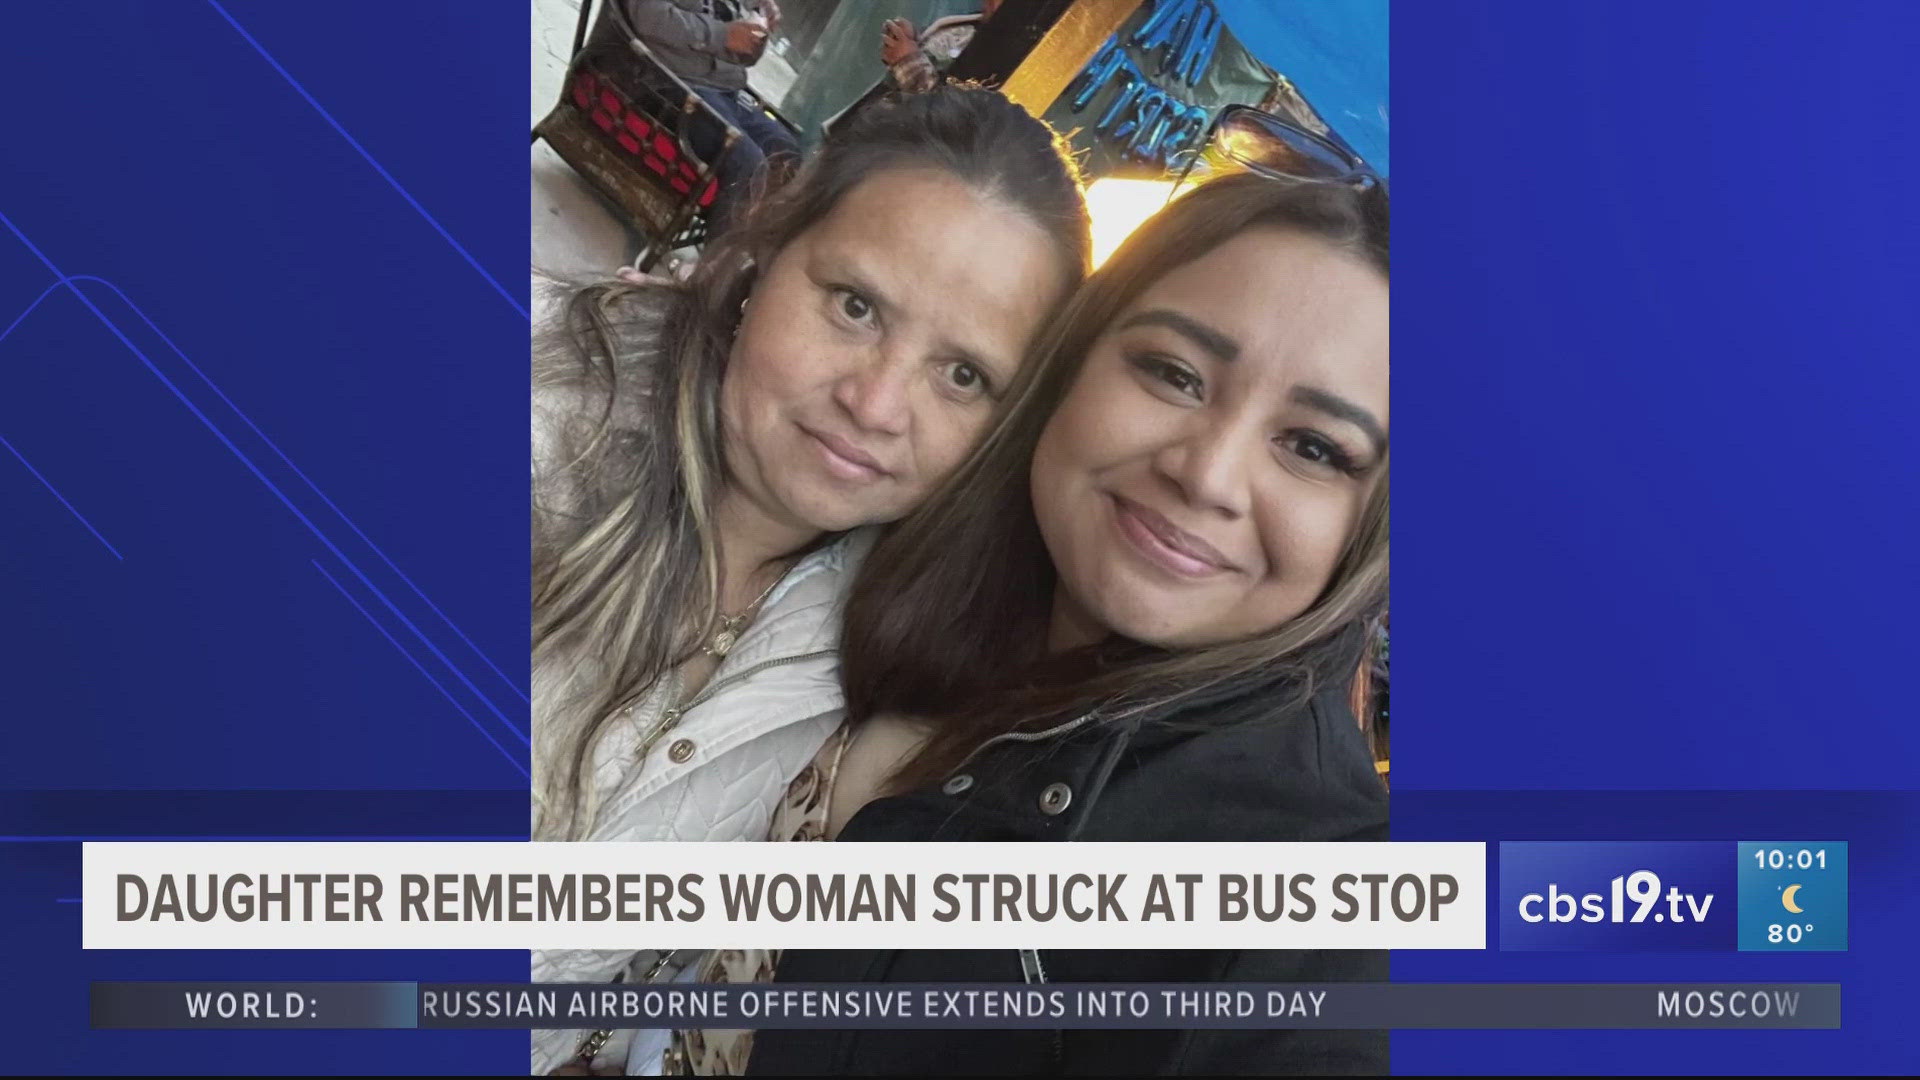 Abrego had moved to Tyler from Houston a couple of months ago for work according to her daughter, Blanca Diaz.